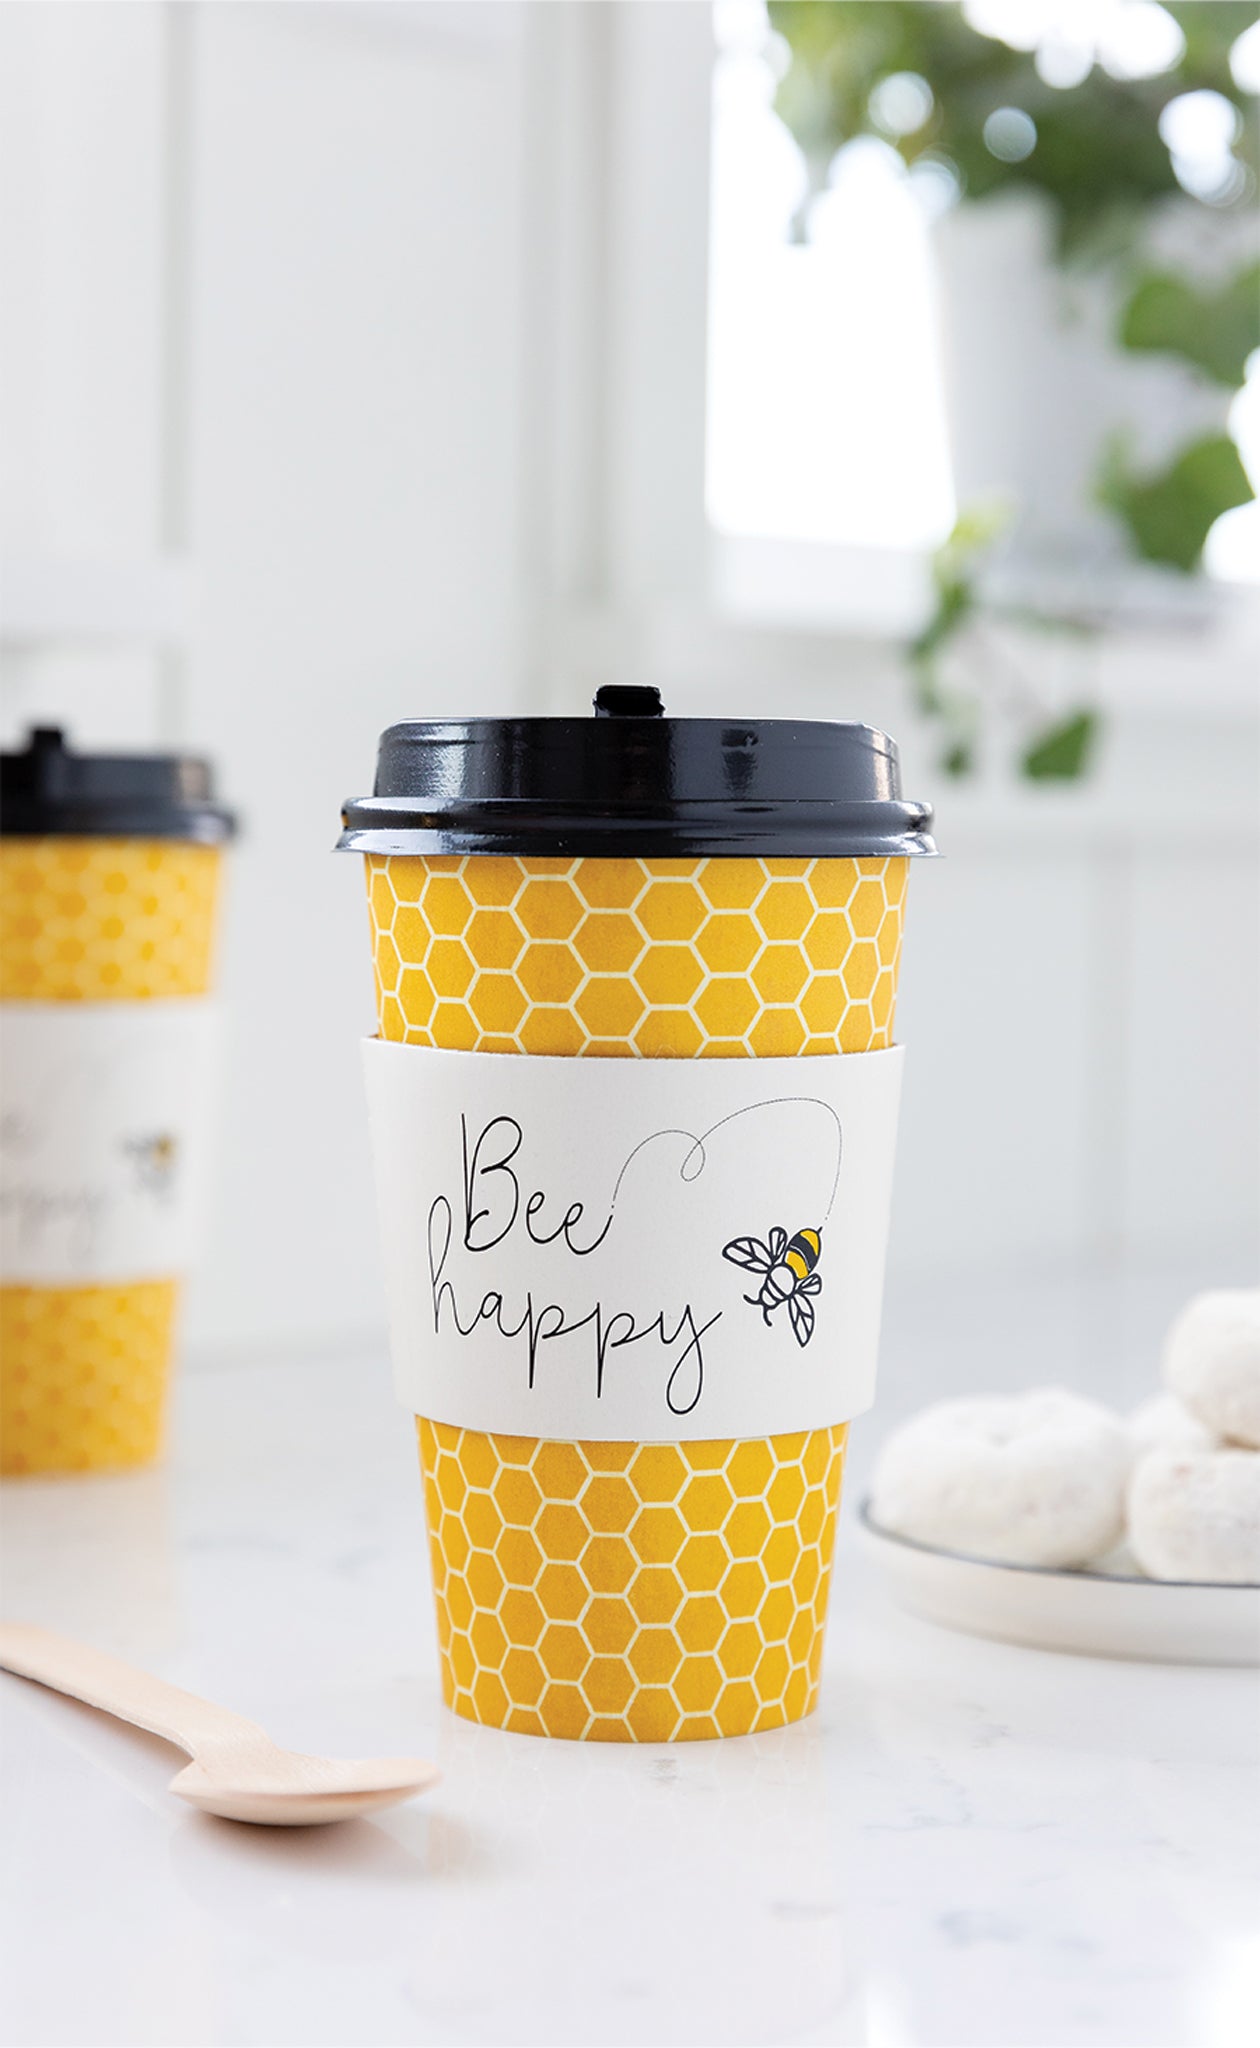 PLLC258 - Bee Happy To-Go Cups (8 ct)